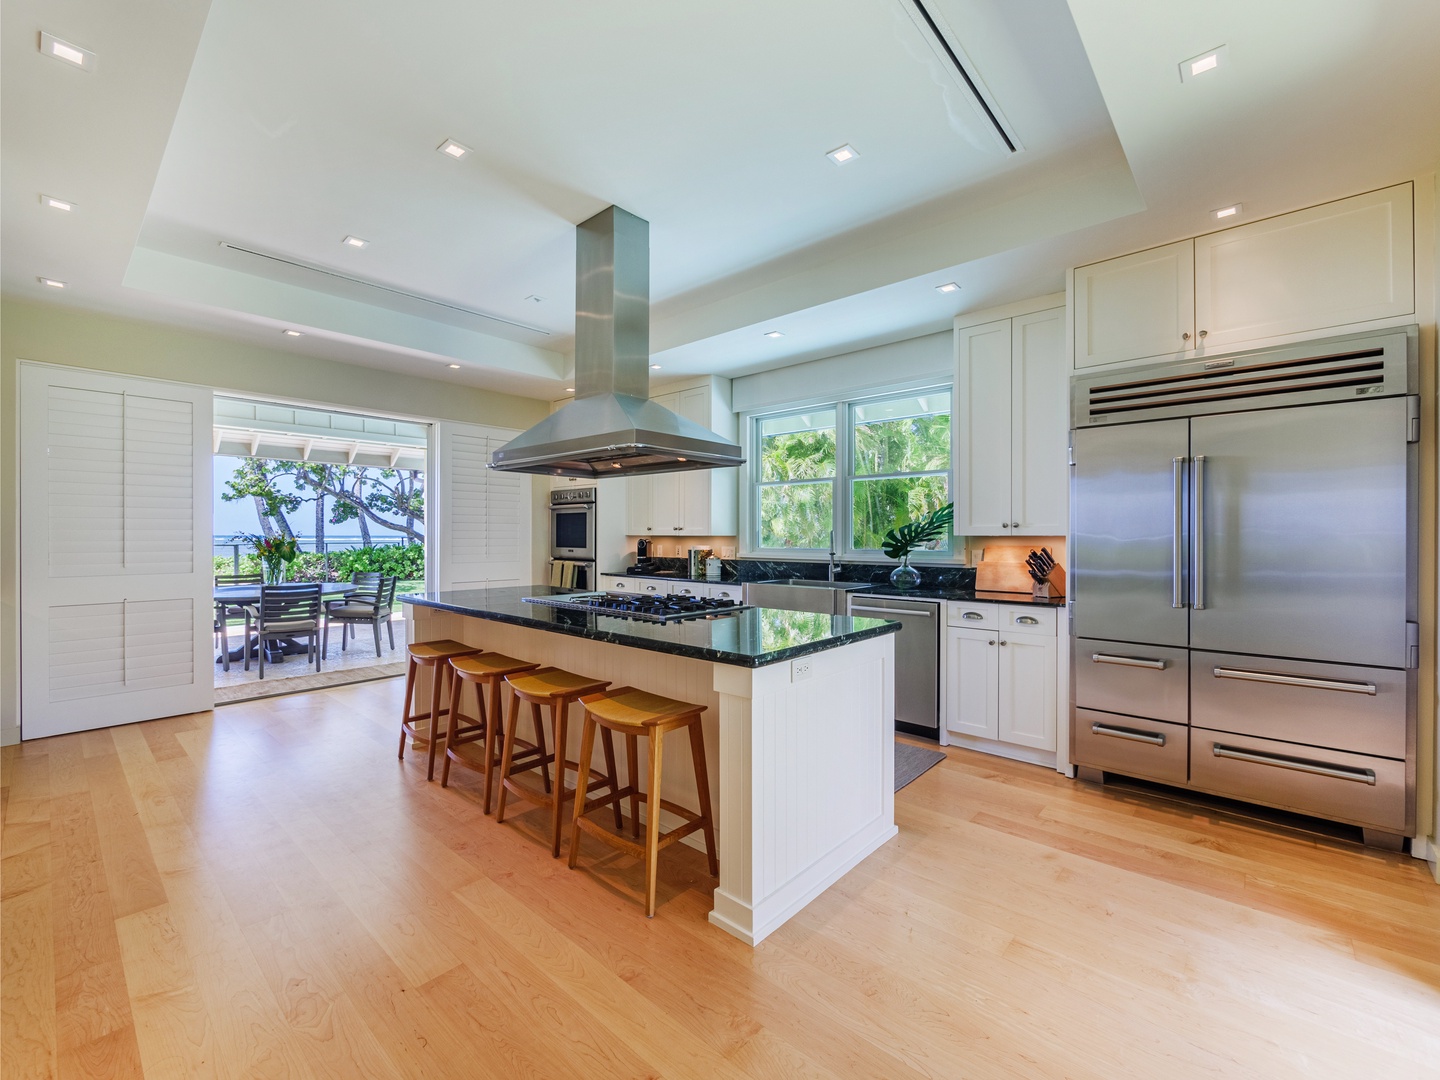 Honolulu Vacation Rentals, Paradise Beach Estate - Dive into culinary adventures in our spacious kitchen area, where ample space meets modern functionality for all your cooking endeavors.